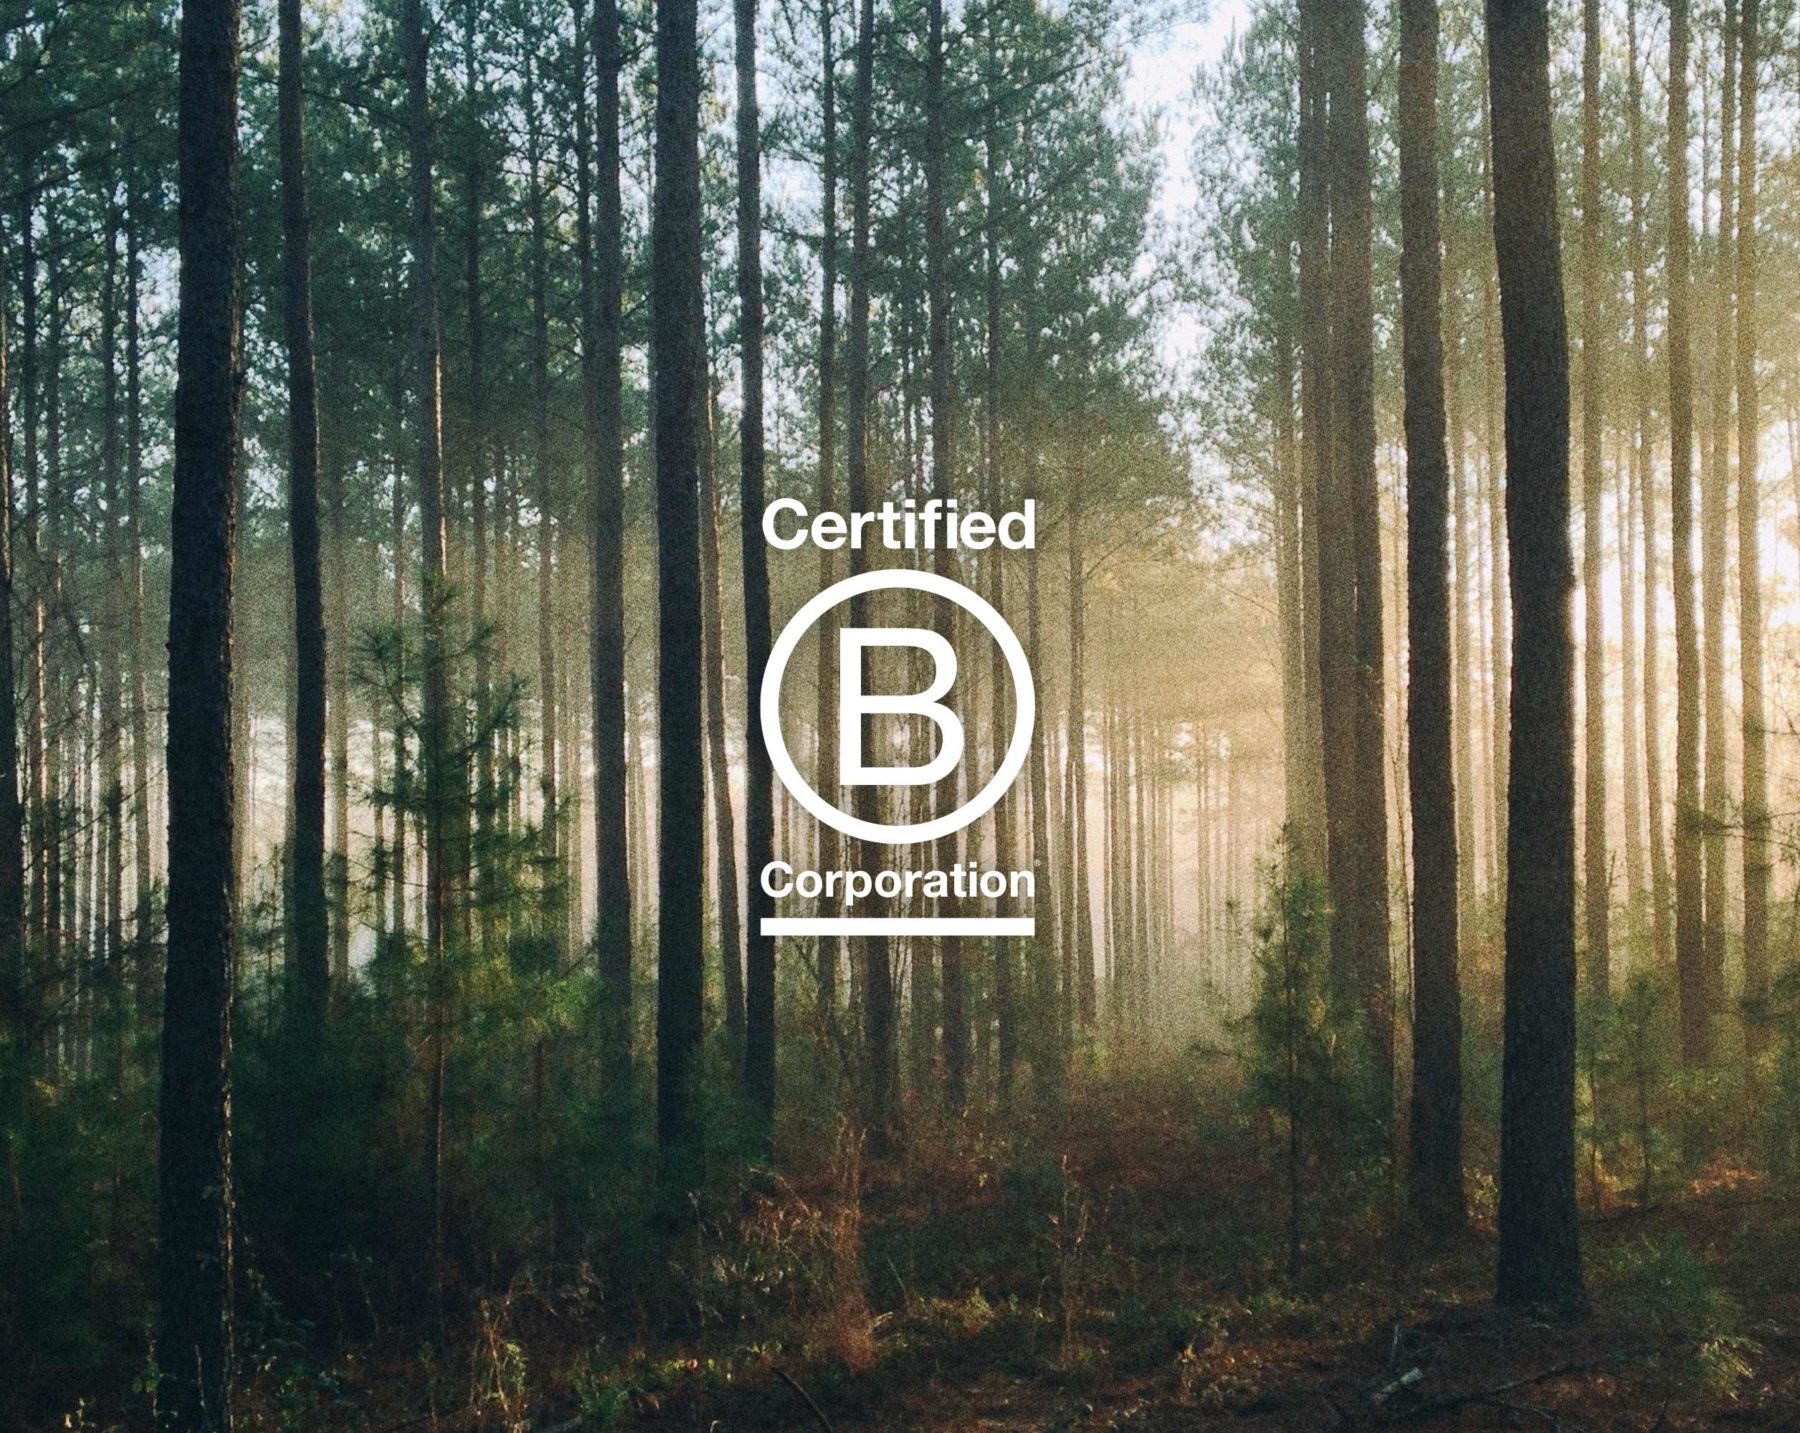 Certified B Corporation logo against forest photo backdrop